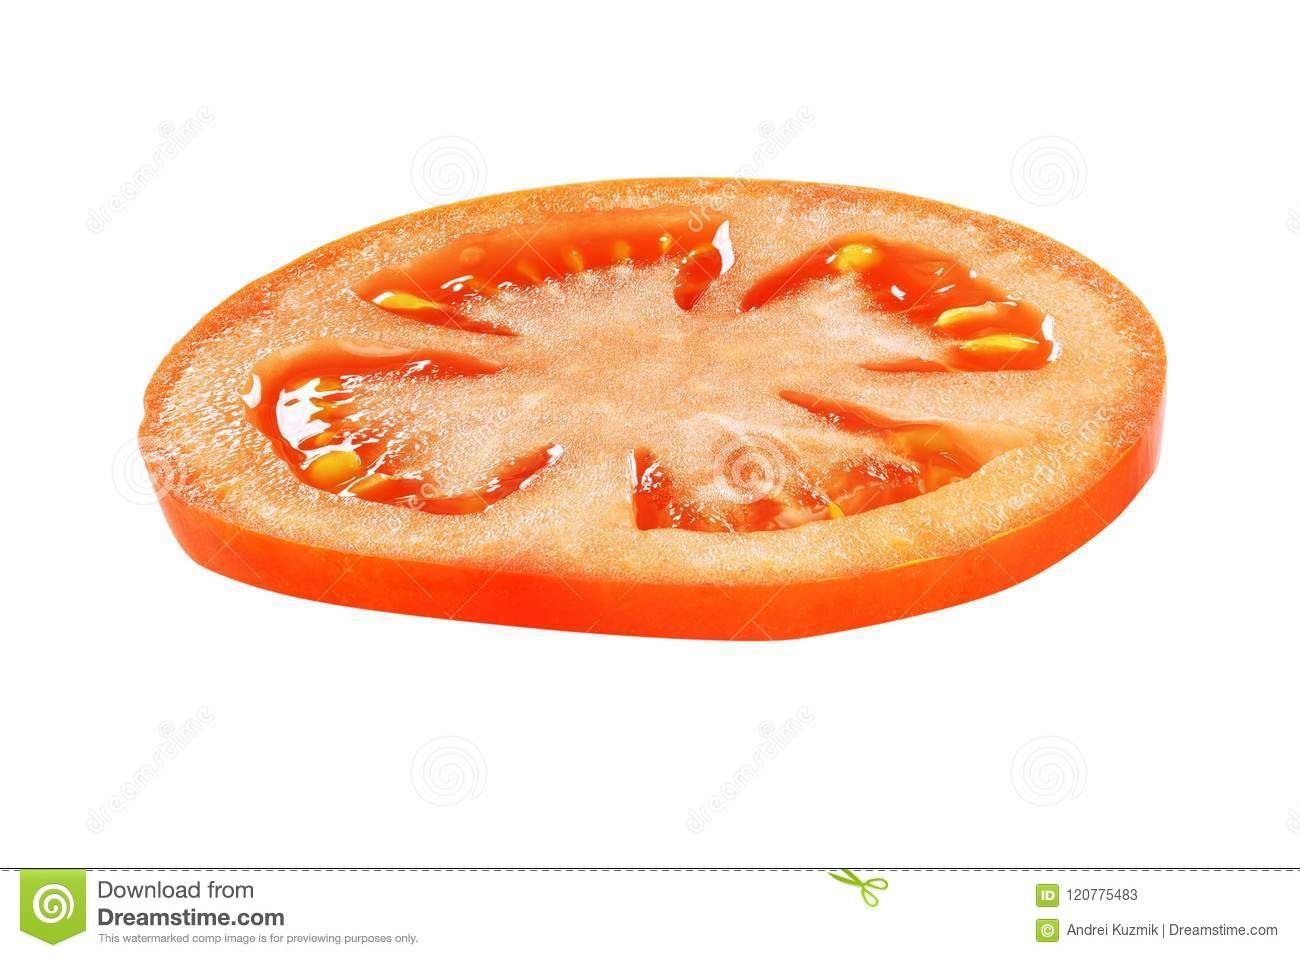 tomato-slice-isolated-red-side-view-white-background-clipping-path-120775483.jpg